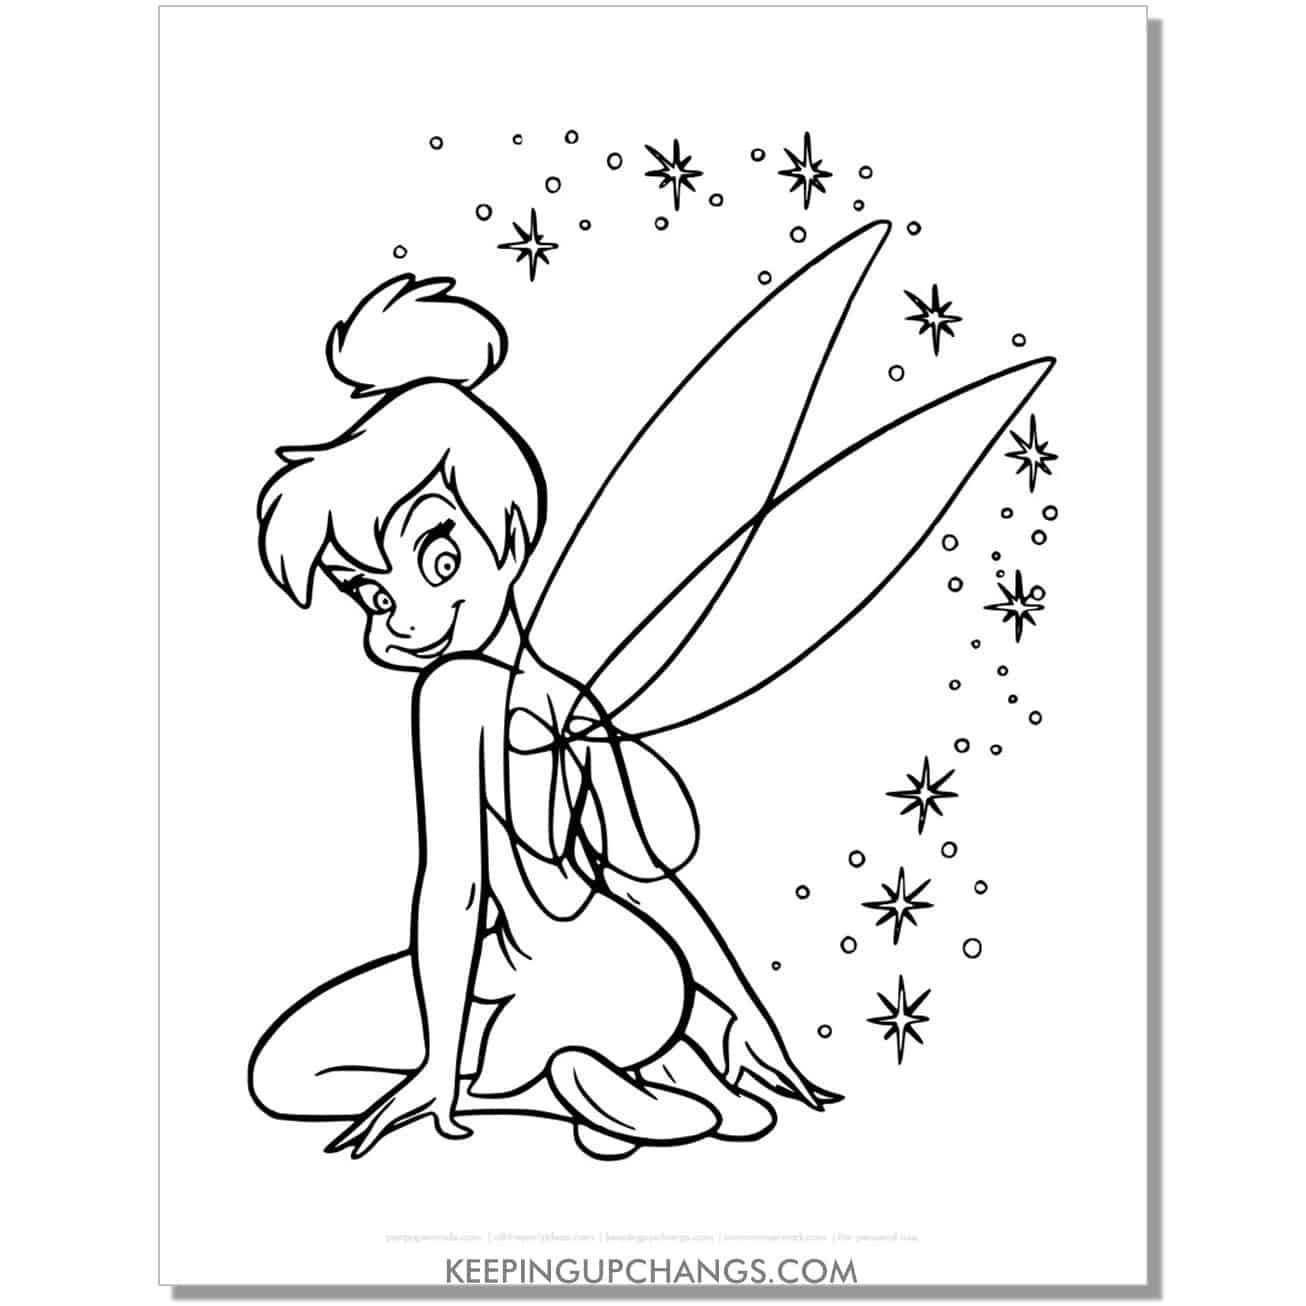 tinkerbell sits with back facing forward coloring page, sheet.